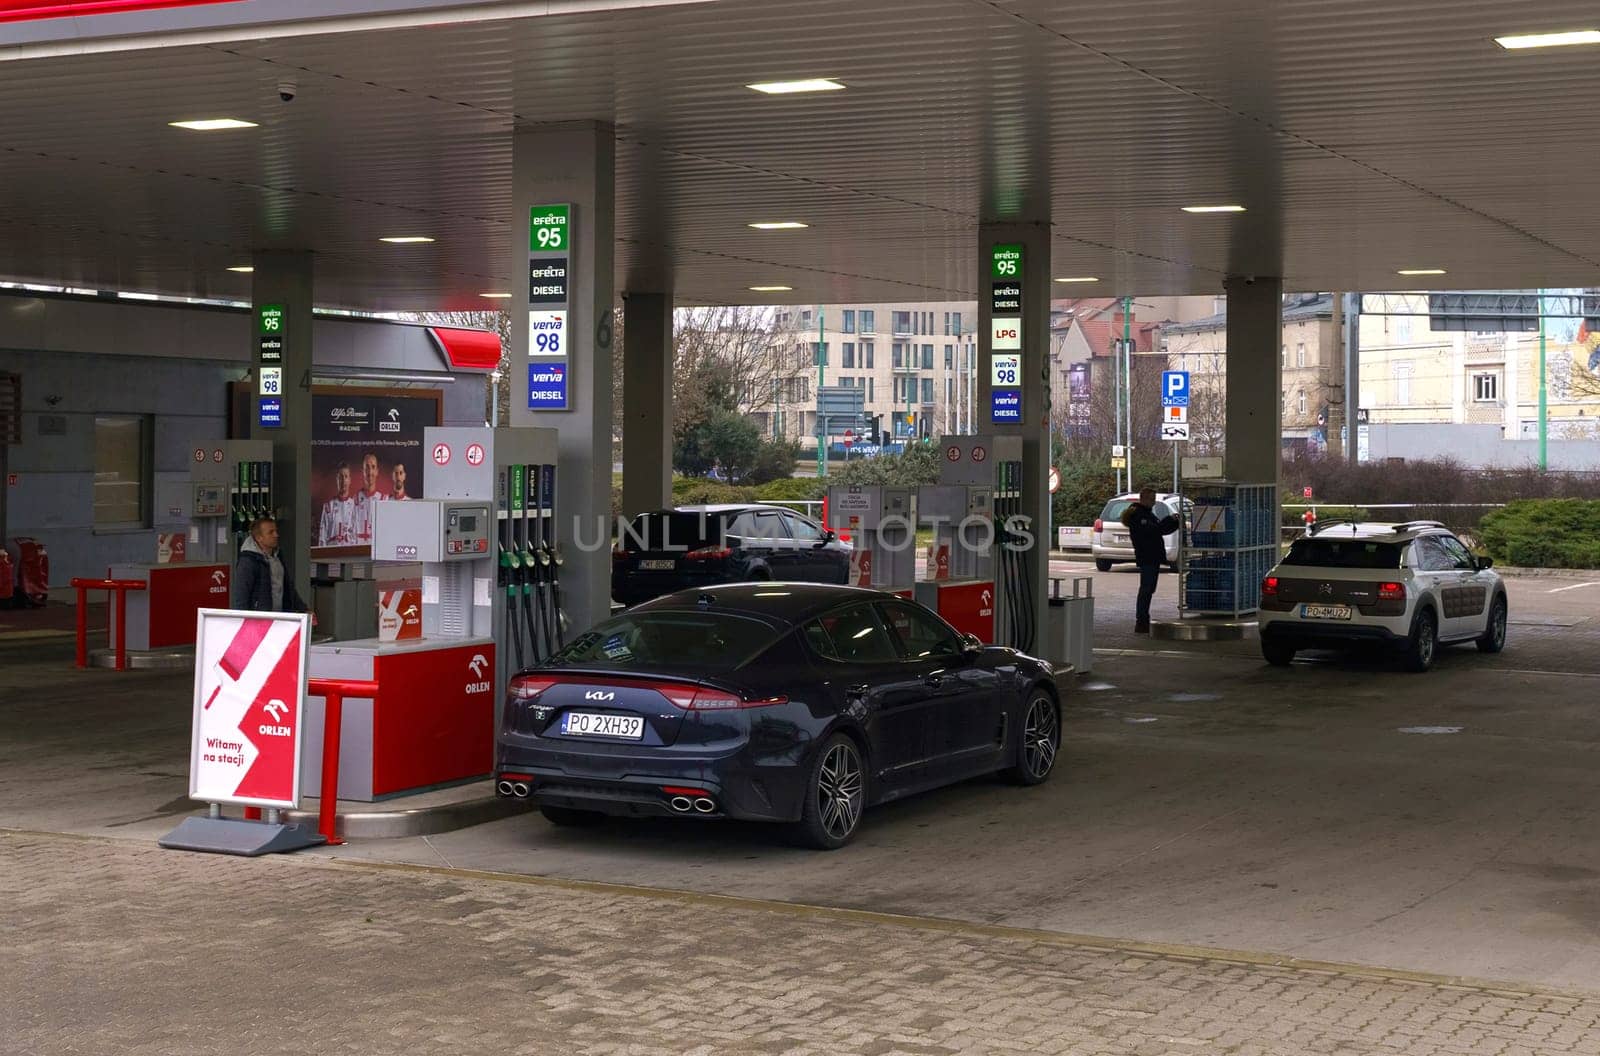 Poznan, Poland - February 11, 2023: Refueling cars at a gas station in the city.